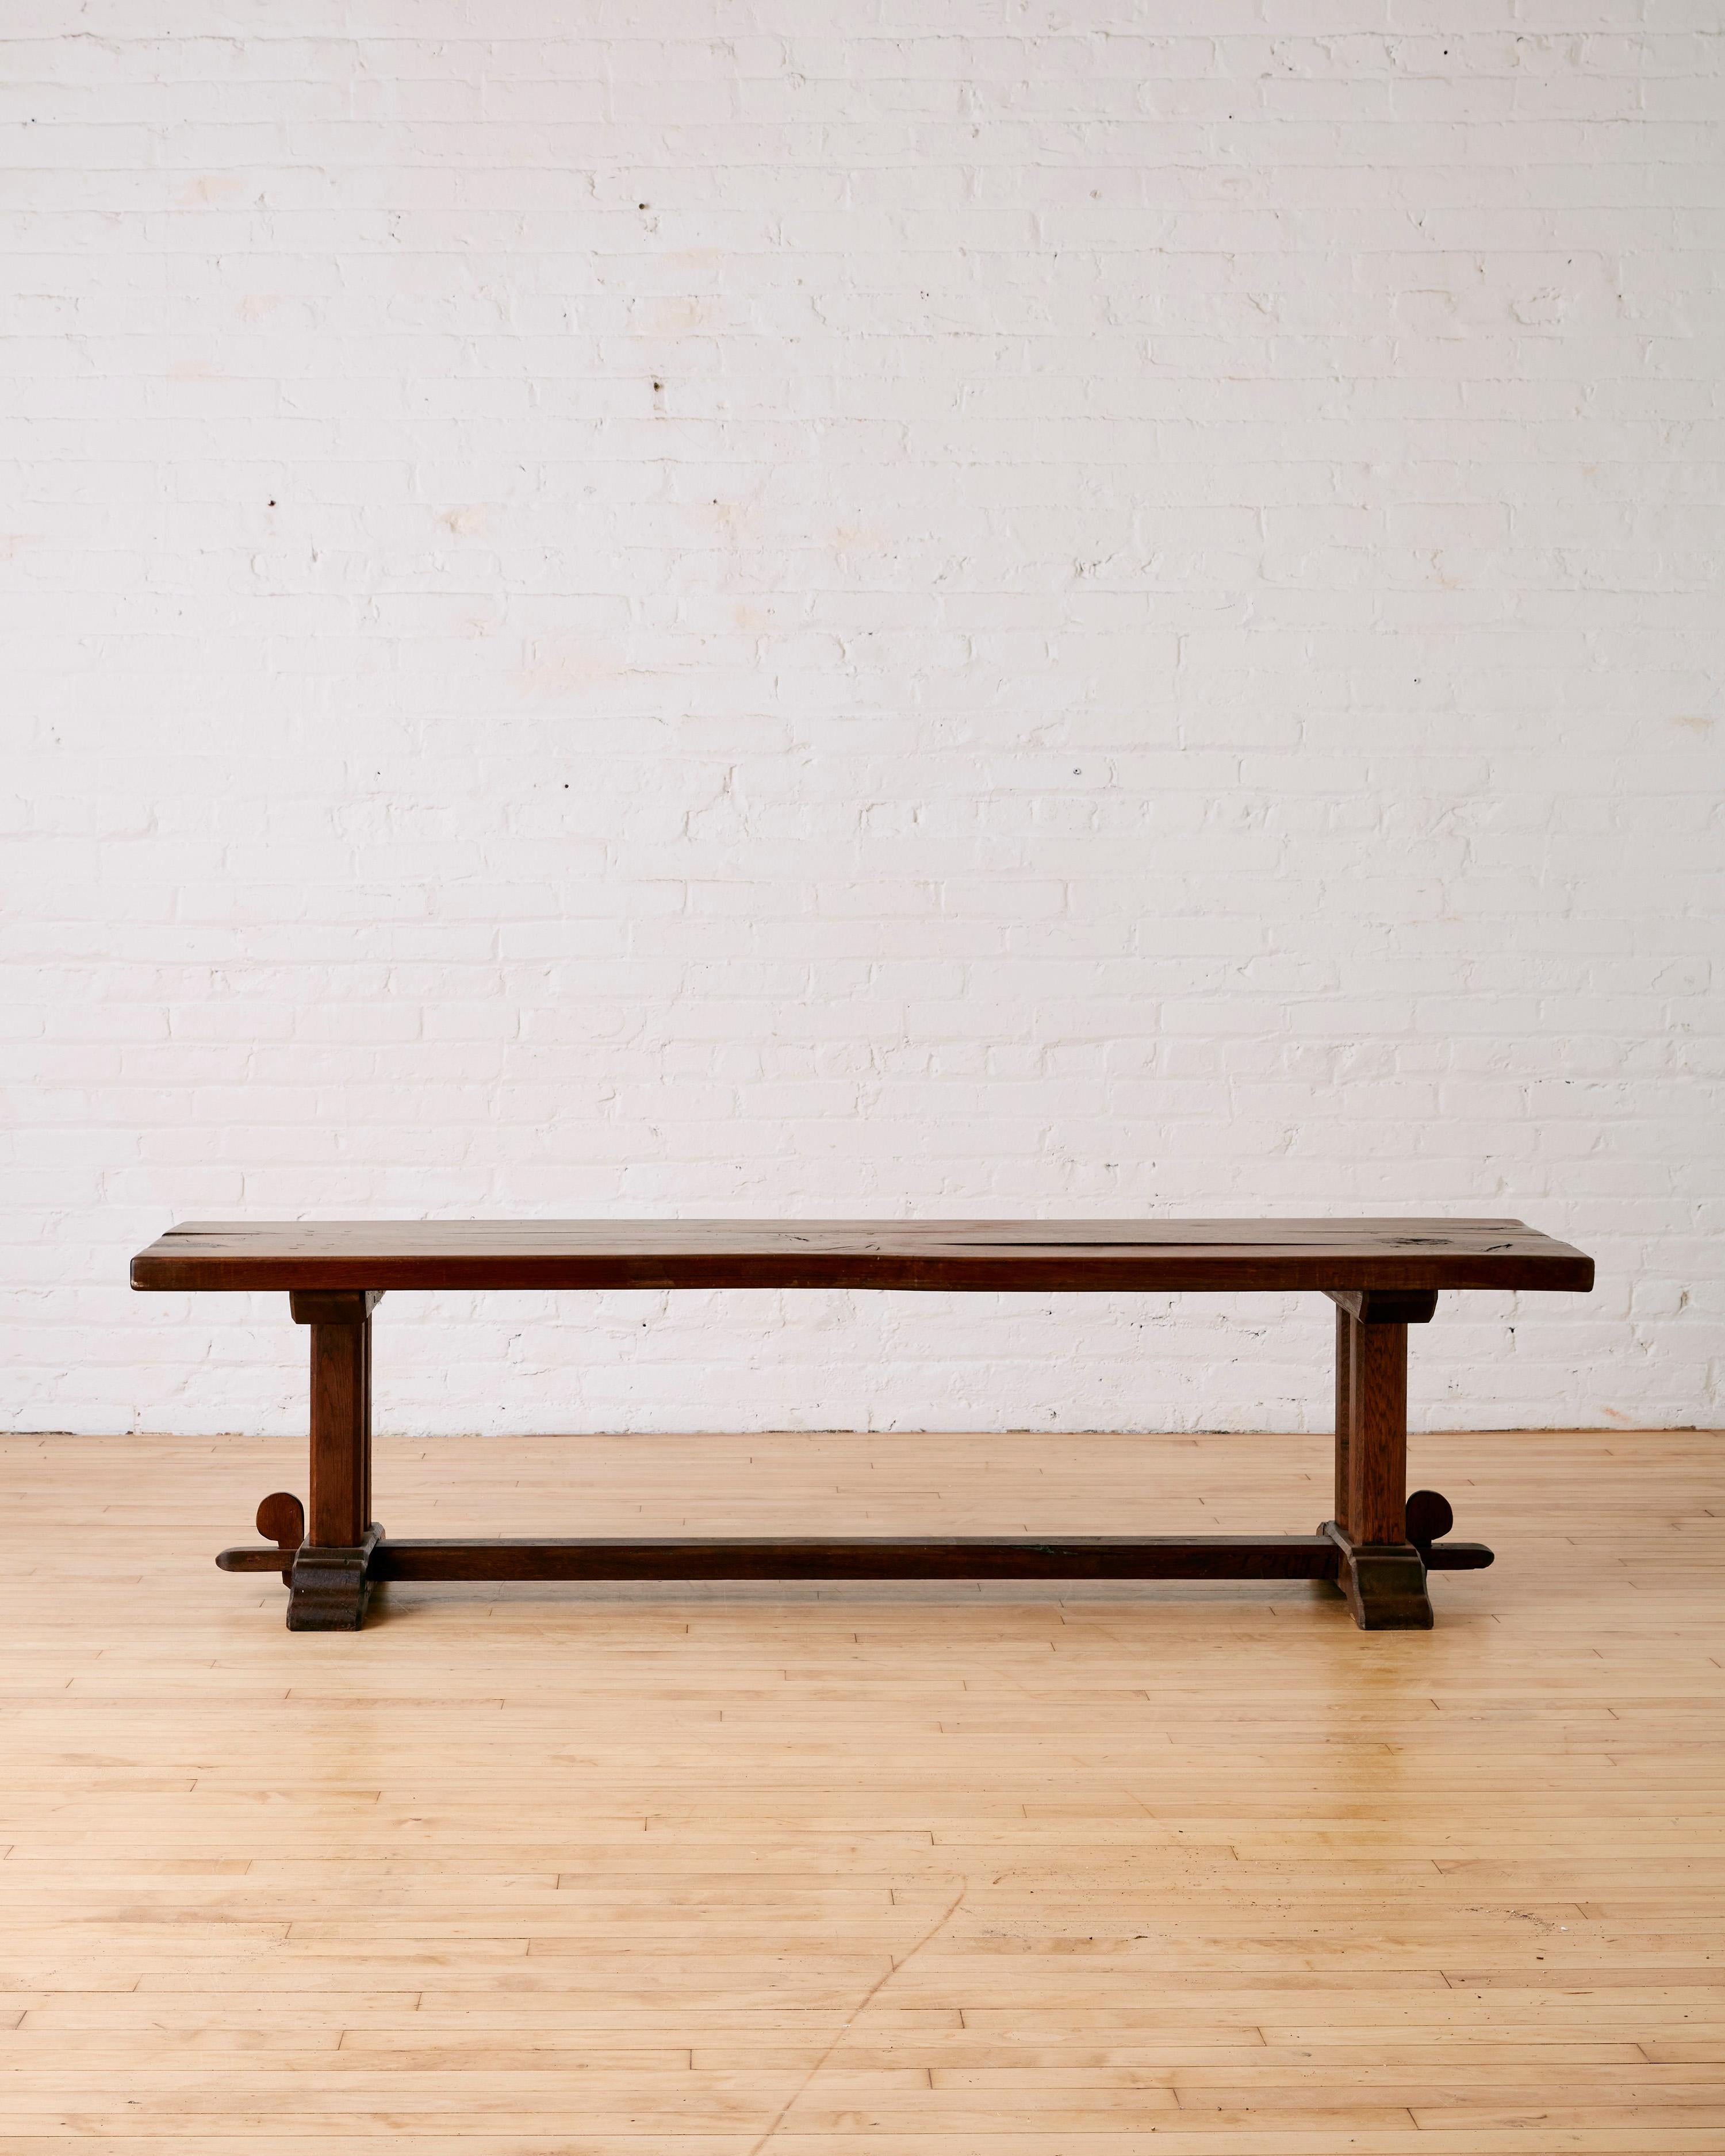 Mid-Century Modern French Oak Plank Bench with Dark, Natural Patina.

Dimensions: 74.5